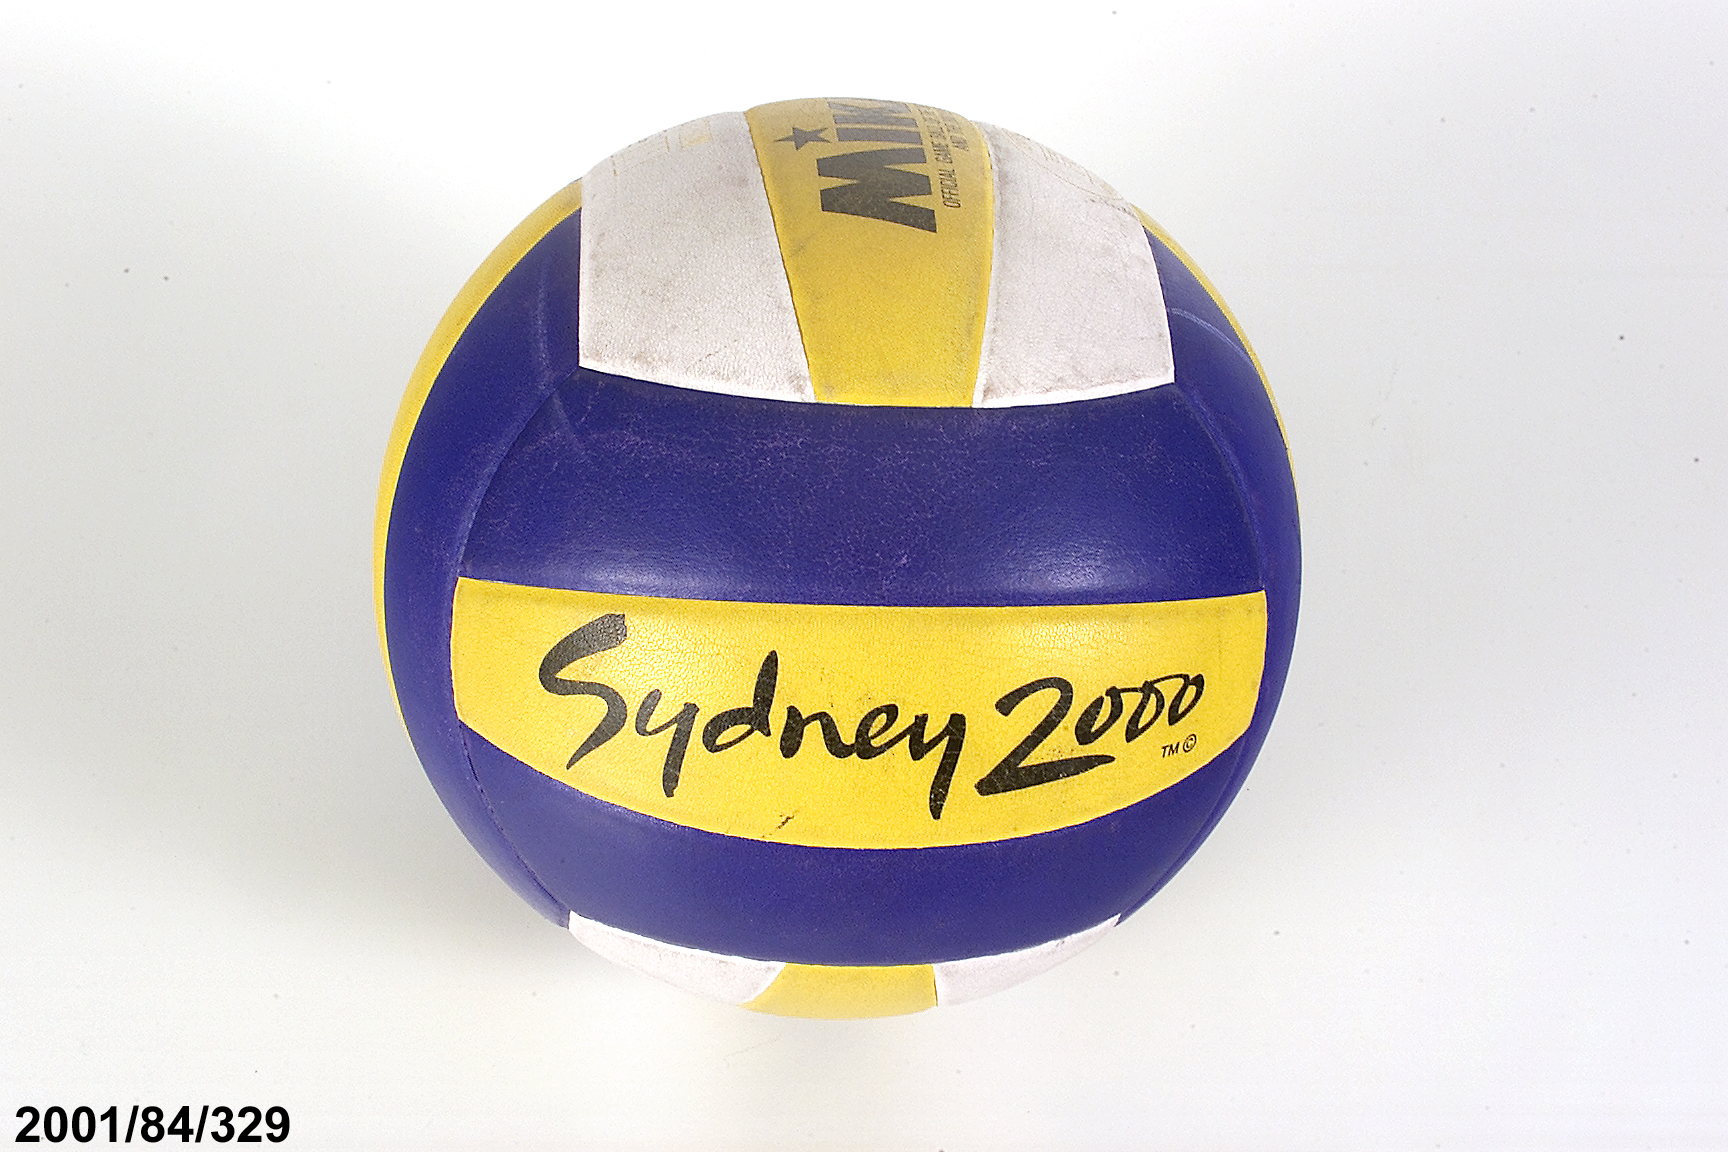 Volleyball for the Sydney Olympic Games made by Mikasa